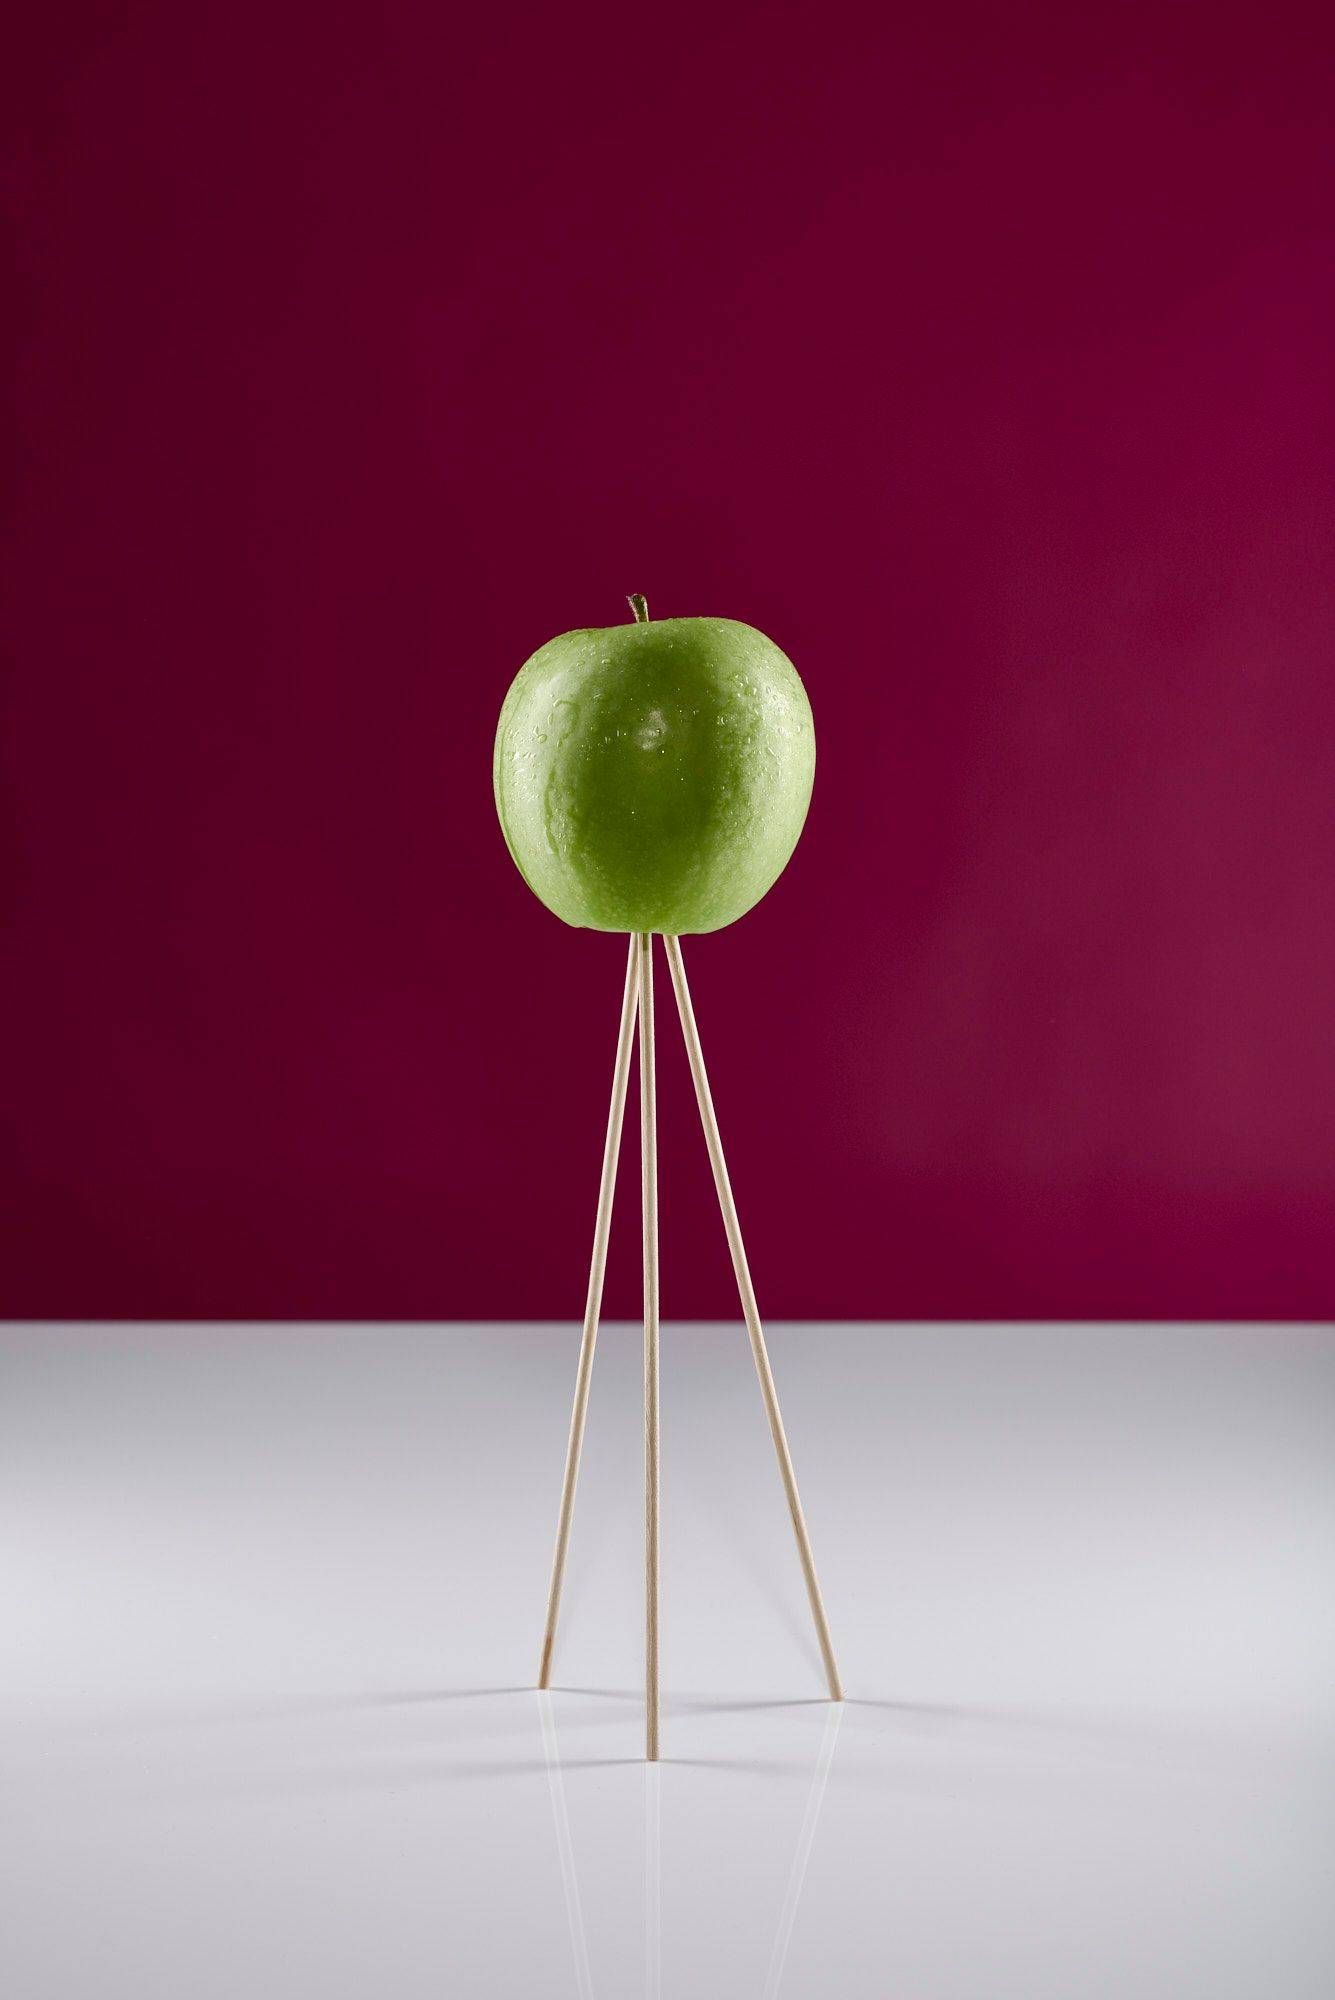 green apple on wooden skewers with white and pink background